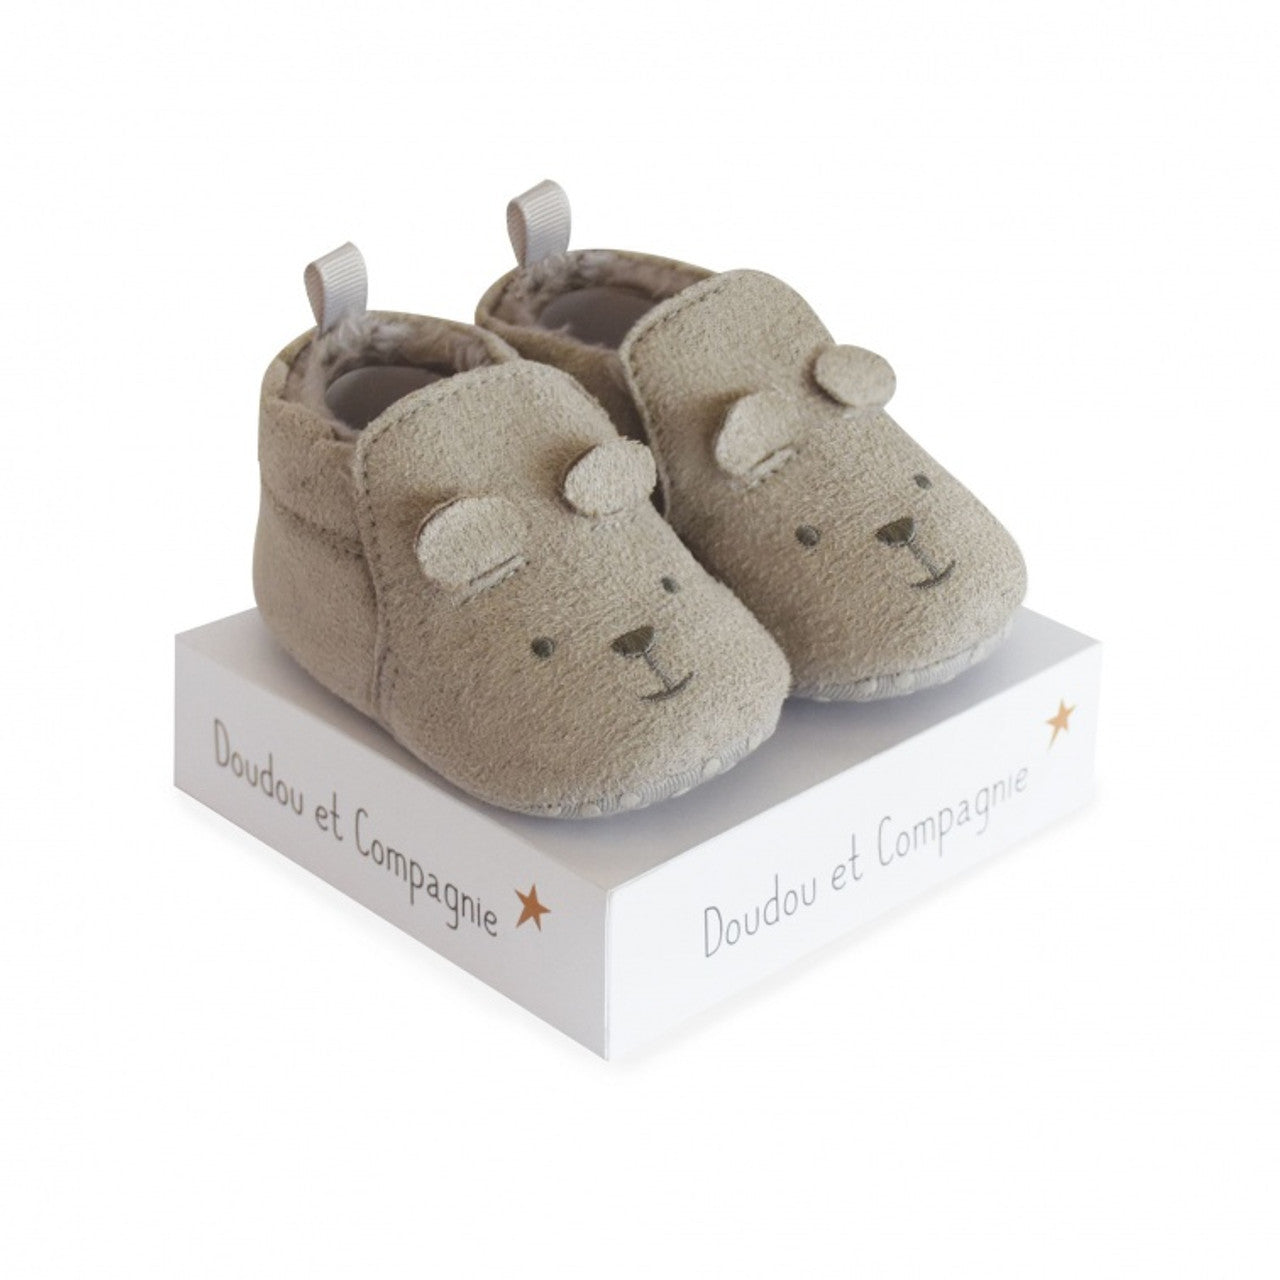 Soft Grey Baby Slippers By Doudou Et Campagnie